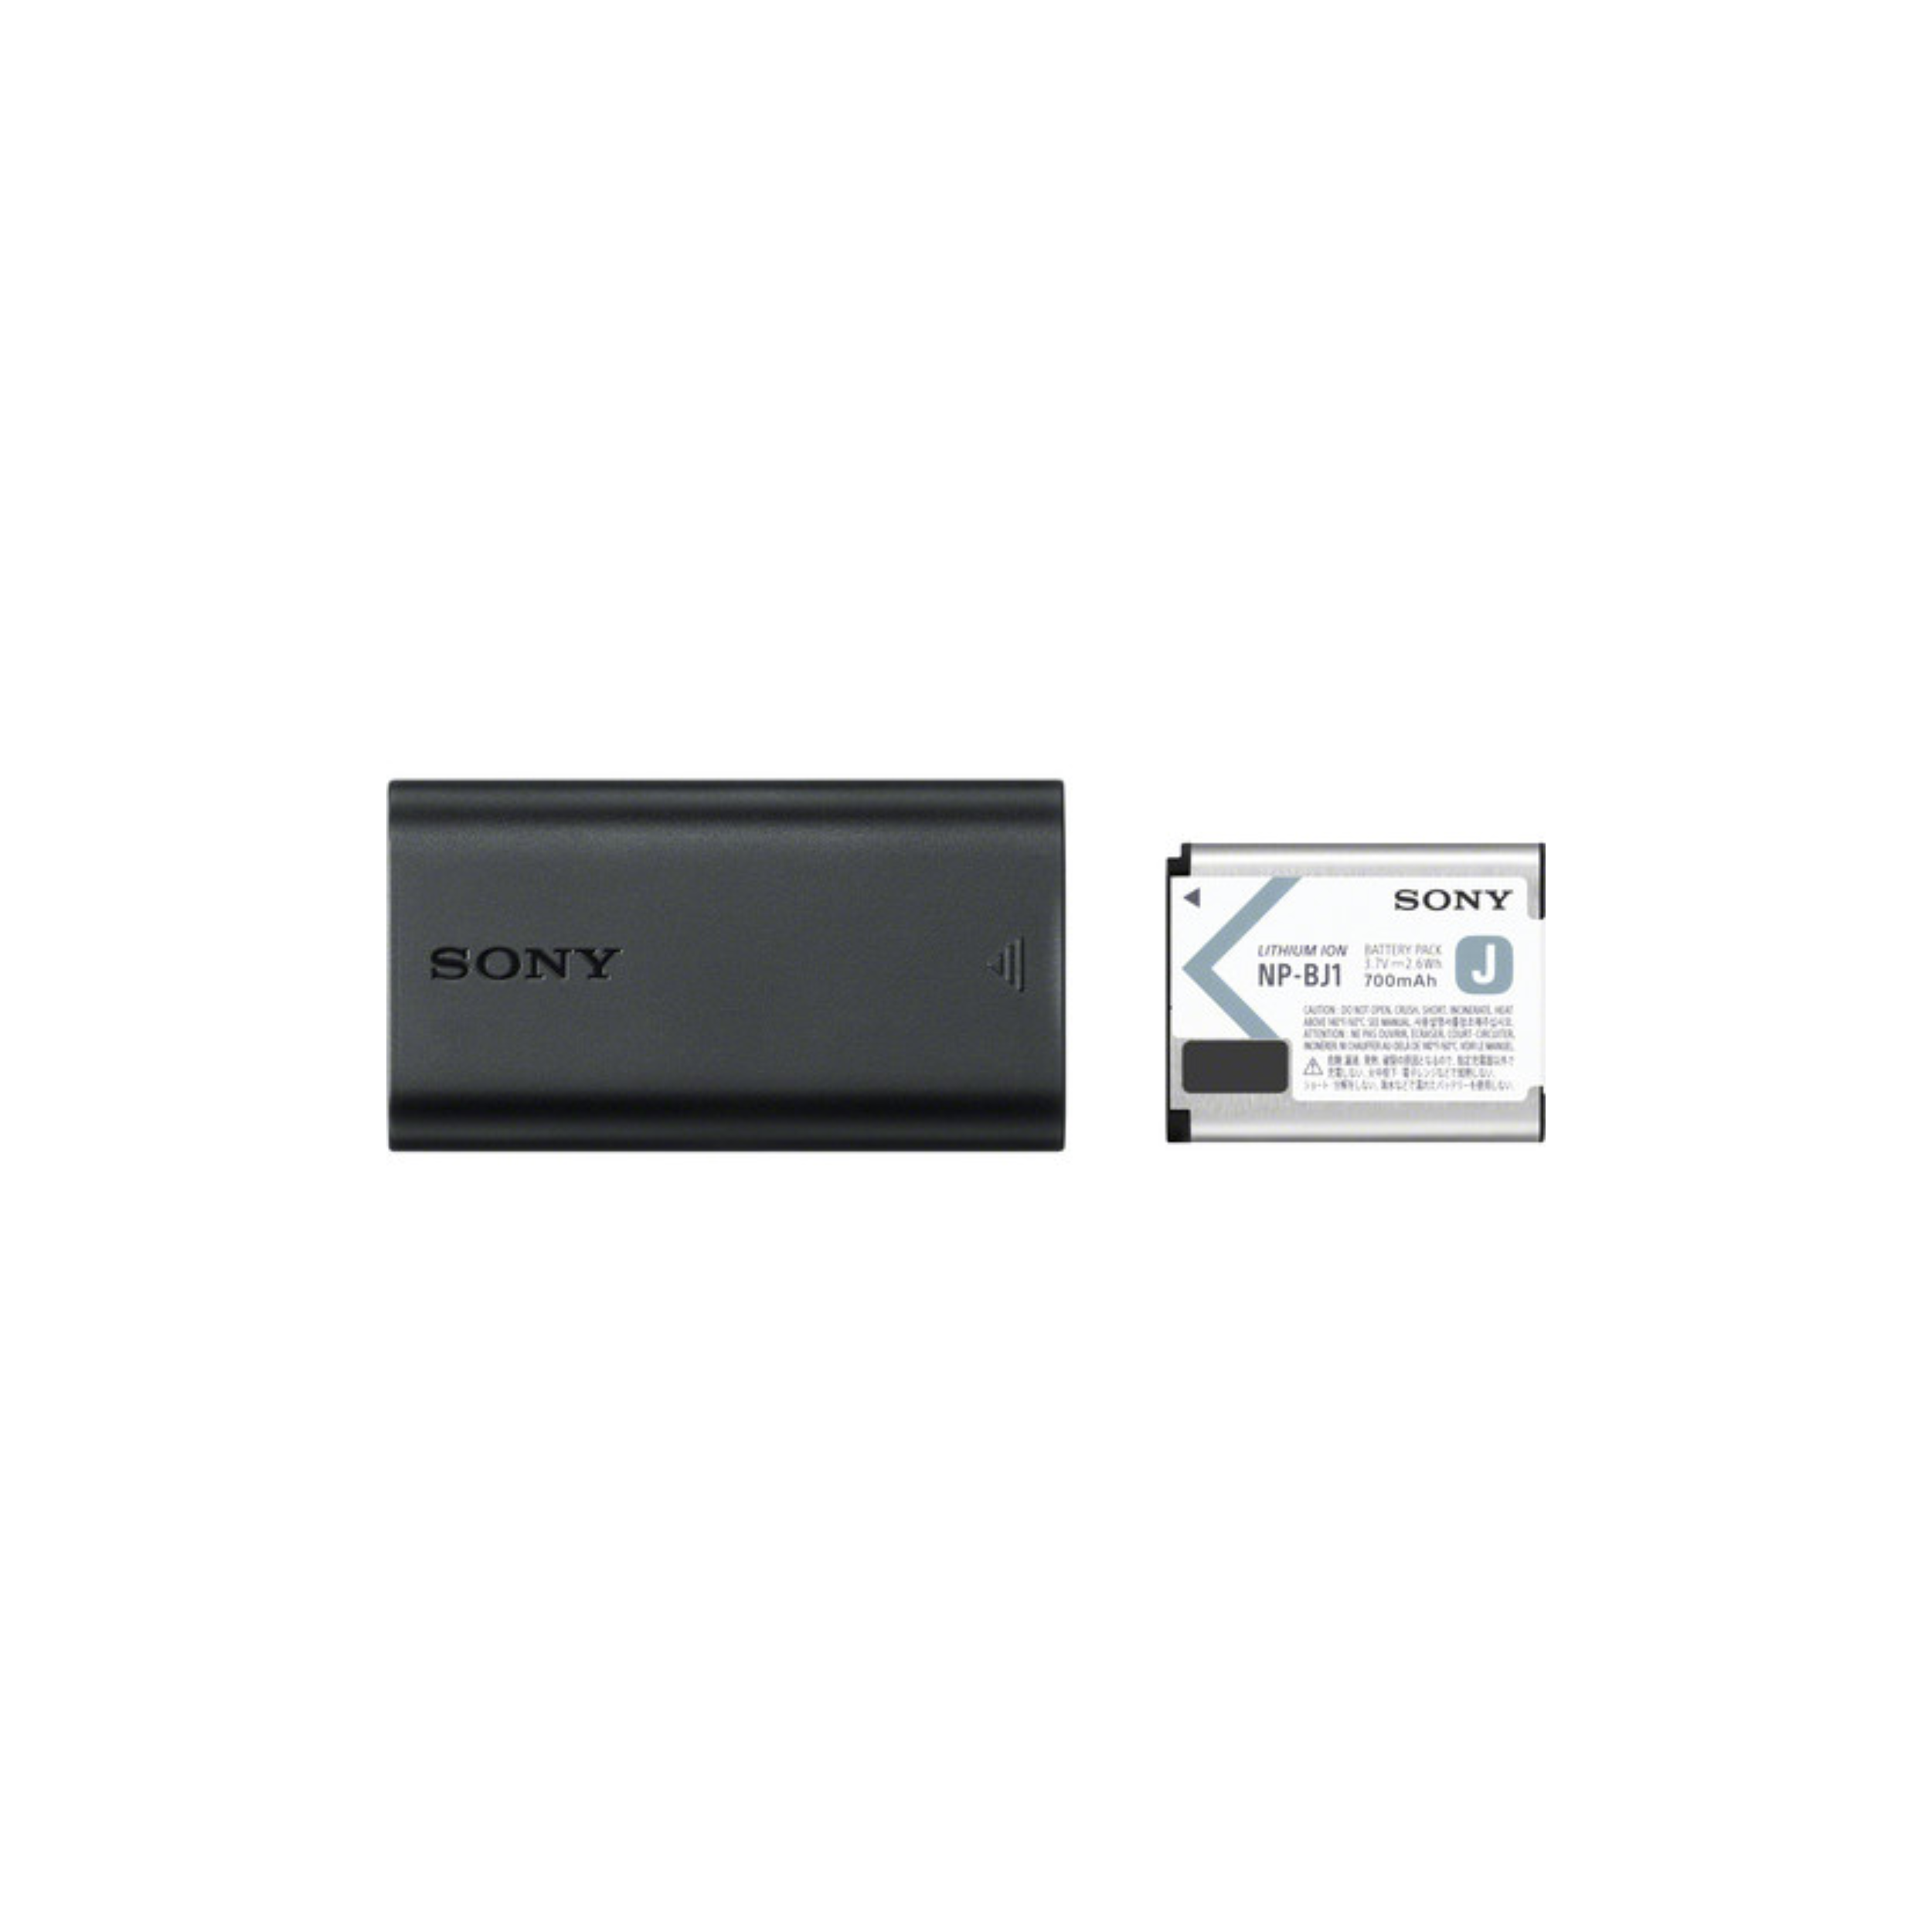 Sony NP-BJ1 Battery Kit with USB Travel Charger for Sony DSC-RX0M2, DSC-RX100M7, DSC-RX100M7G